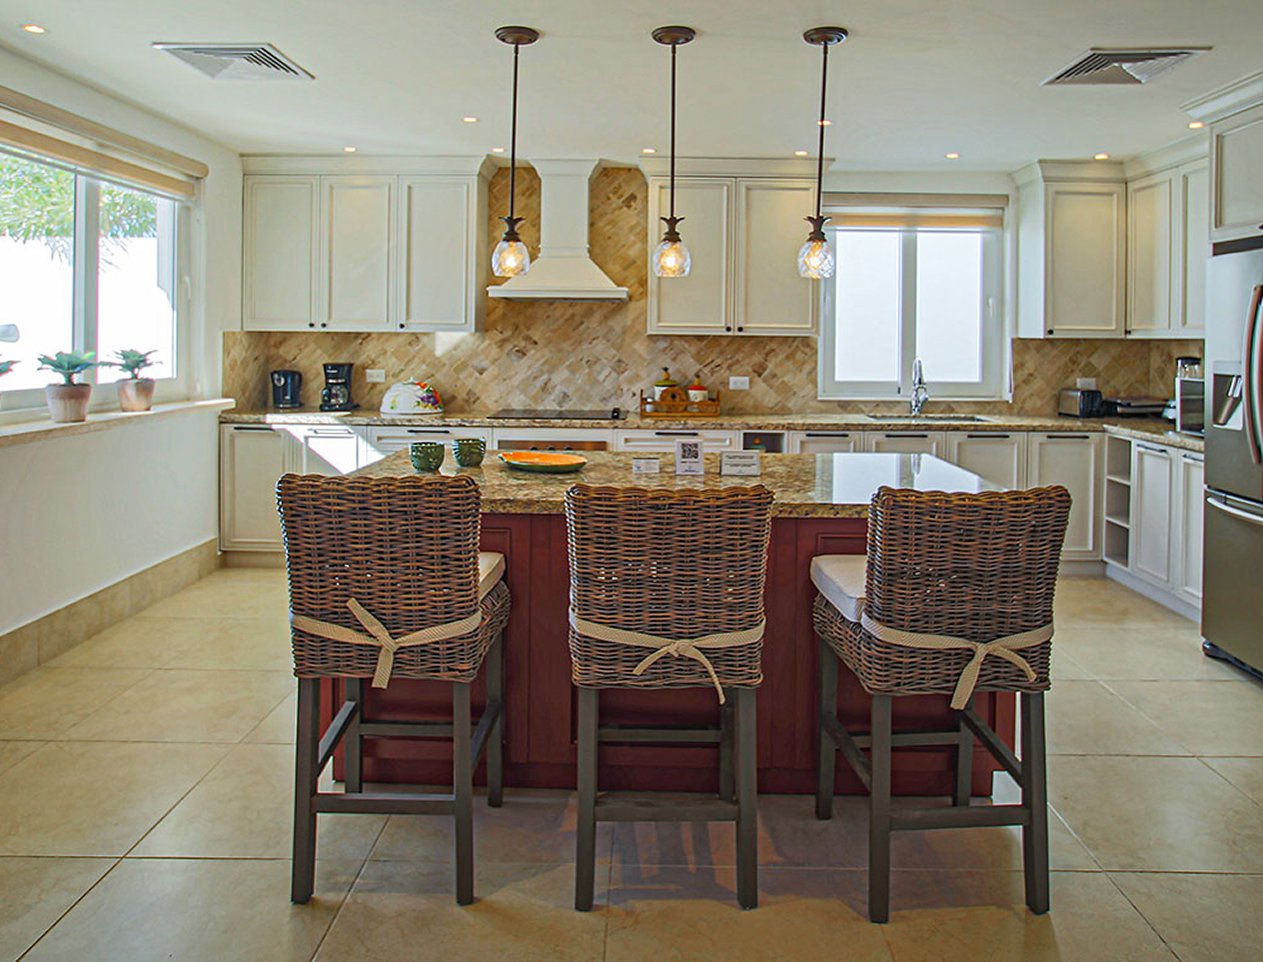 View of kitchen island with three chairs set for breakfast